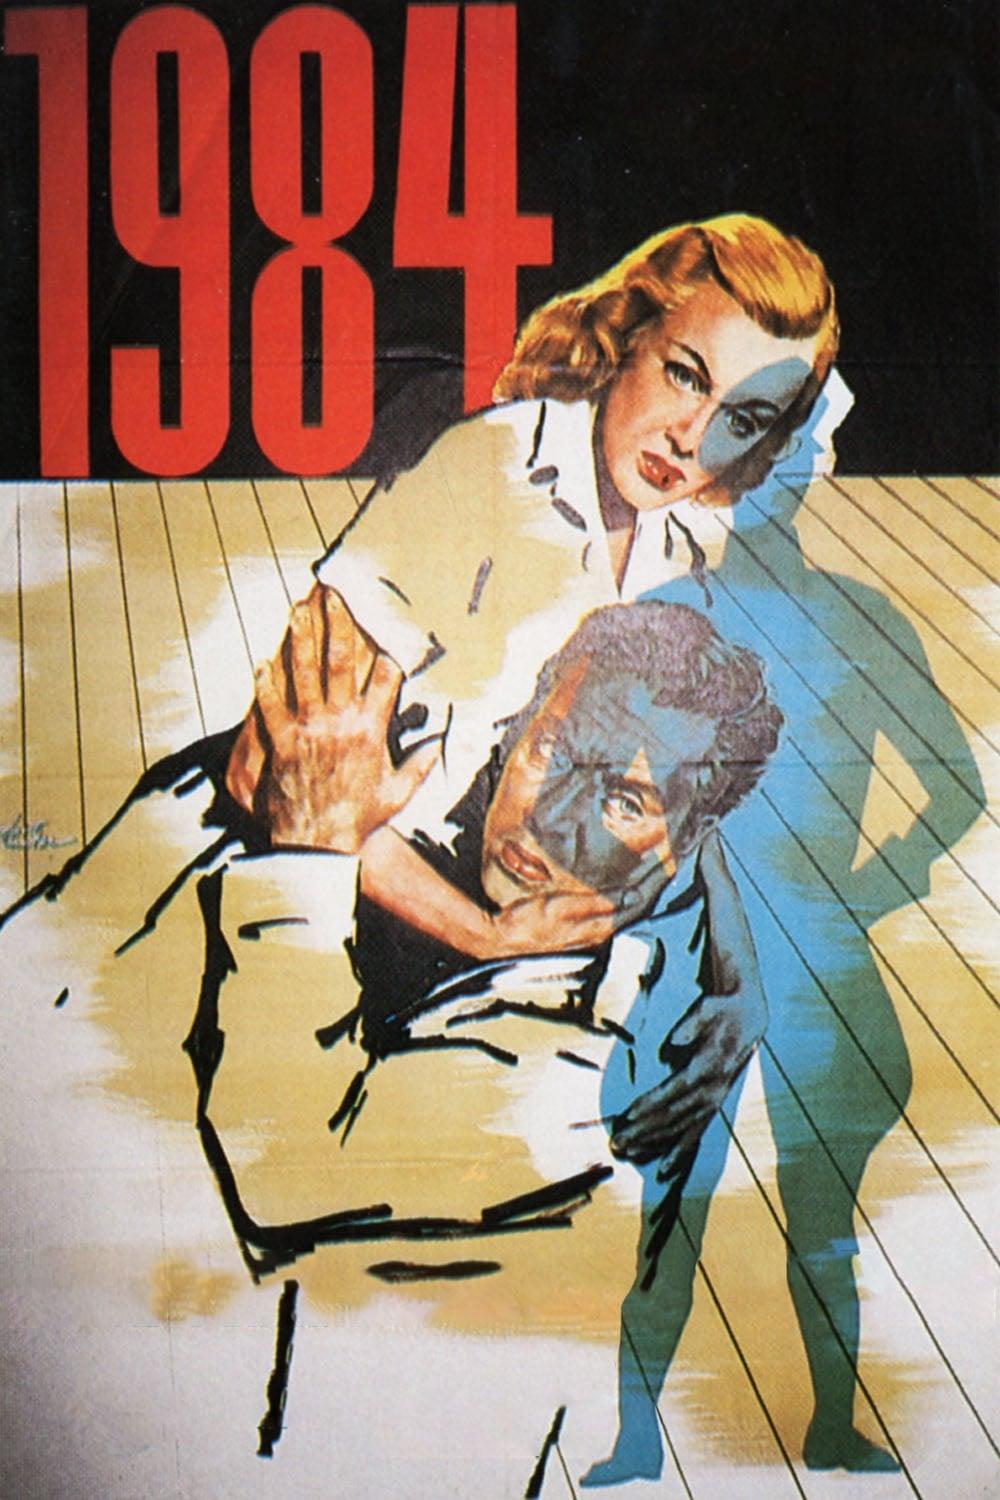 1984 poster